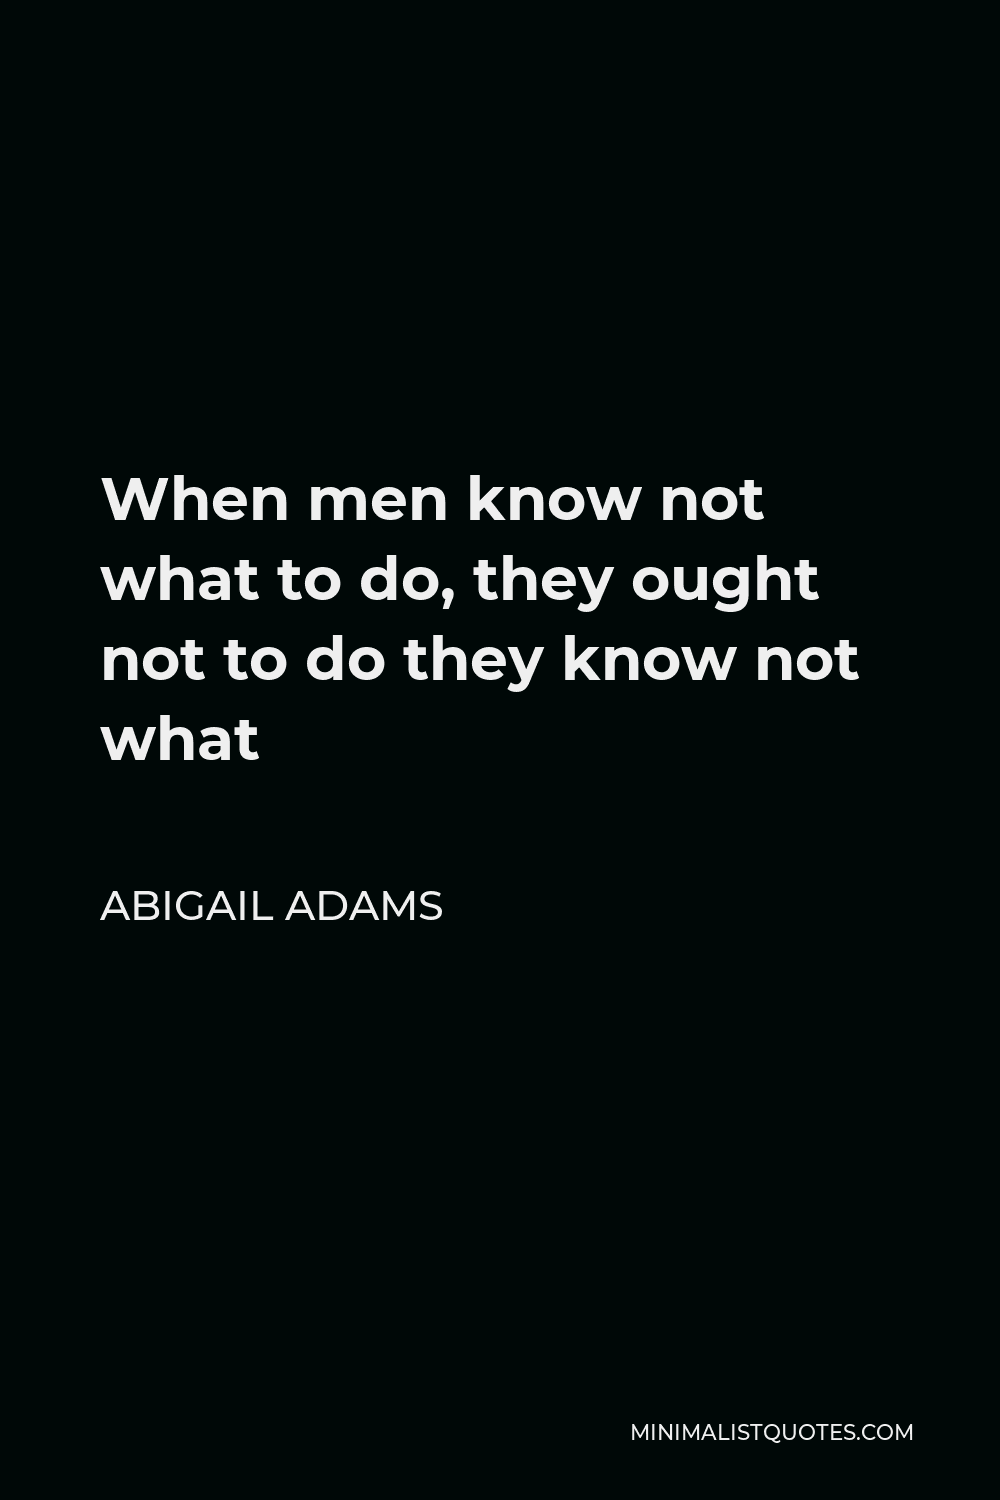 Abigail Adams Quote - When men know not what to do, they ought not to do they know not what